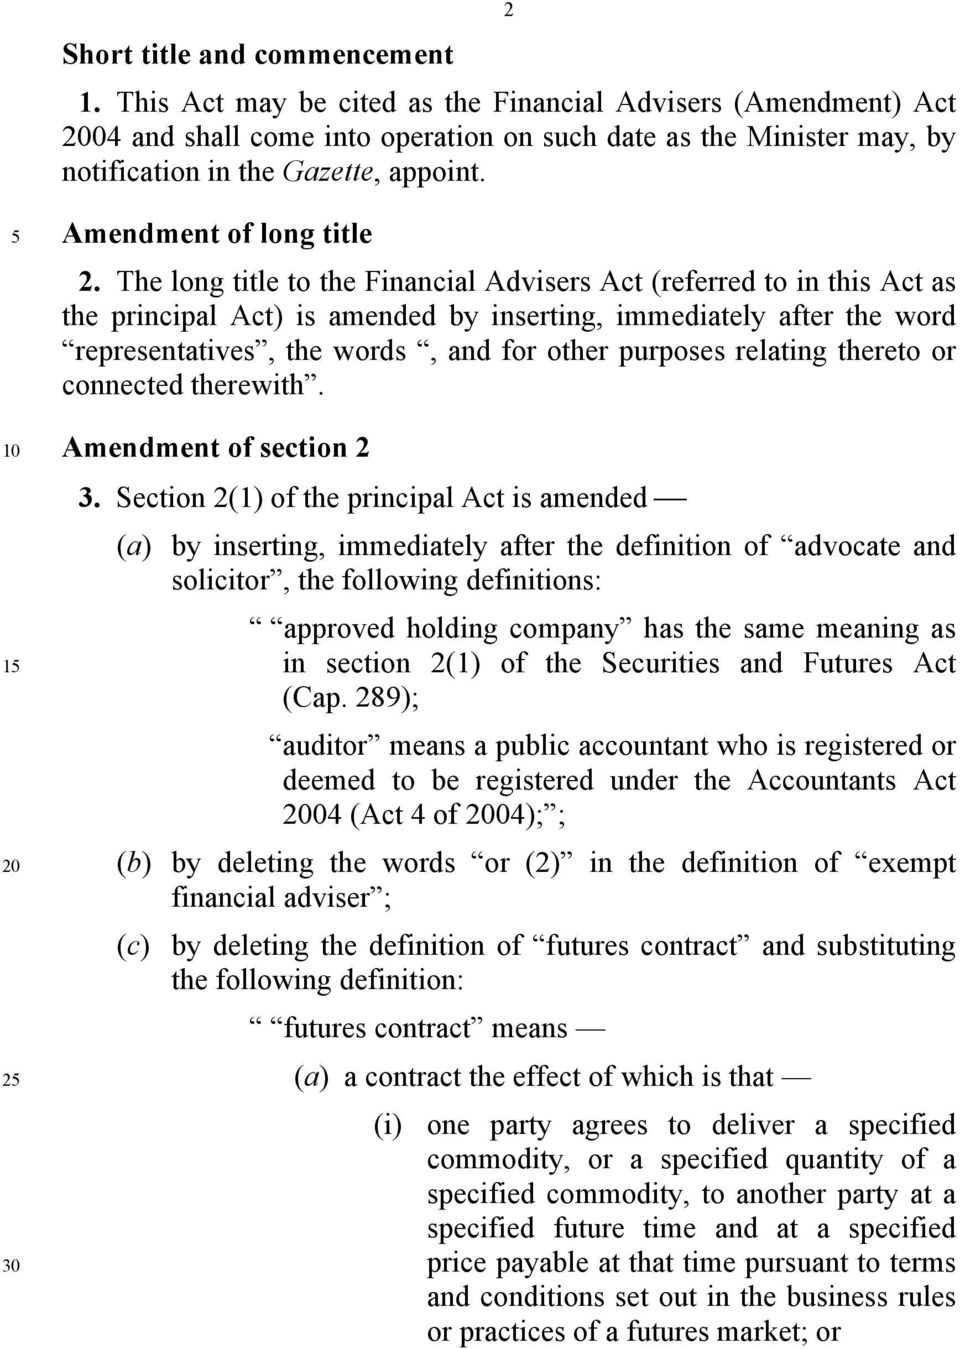 The long title to the Financial Advisers Act (referred to in this Act as the principal Act) is amended by inserting, immediately after the word representatives, the words, and for other purposes